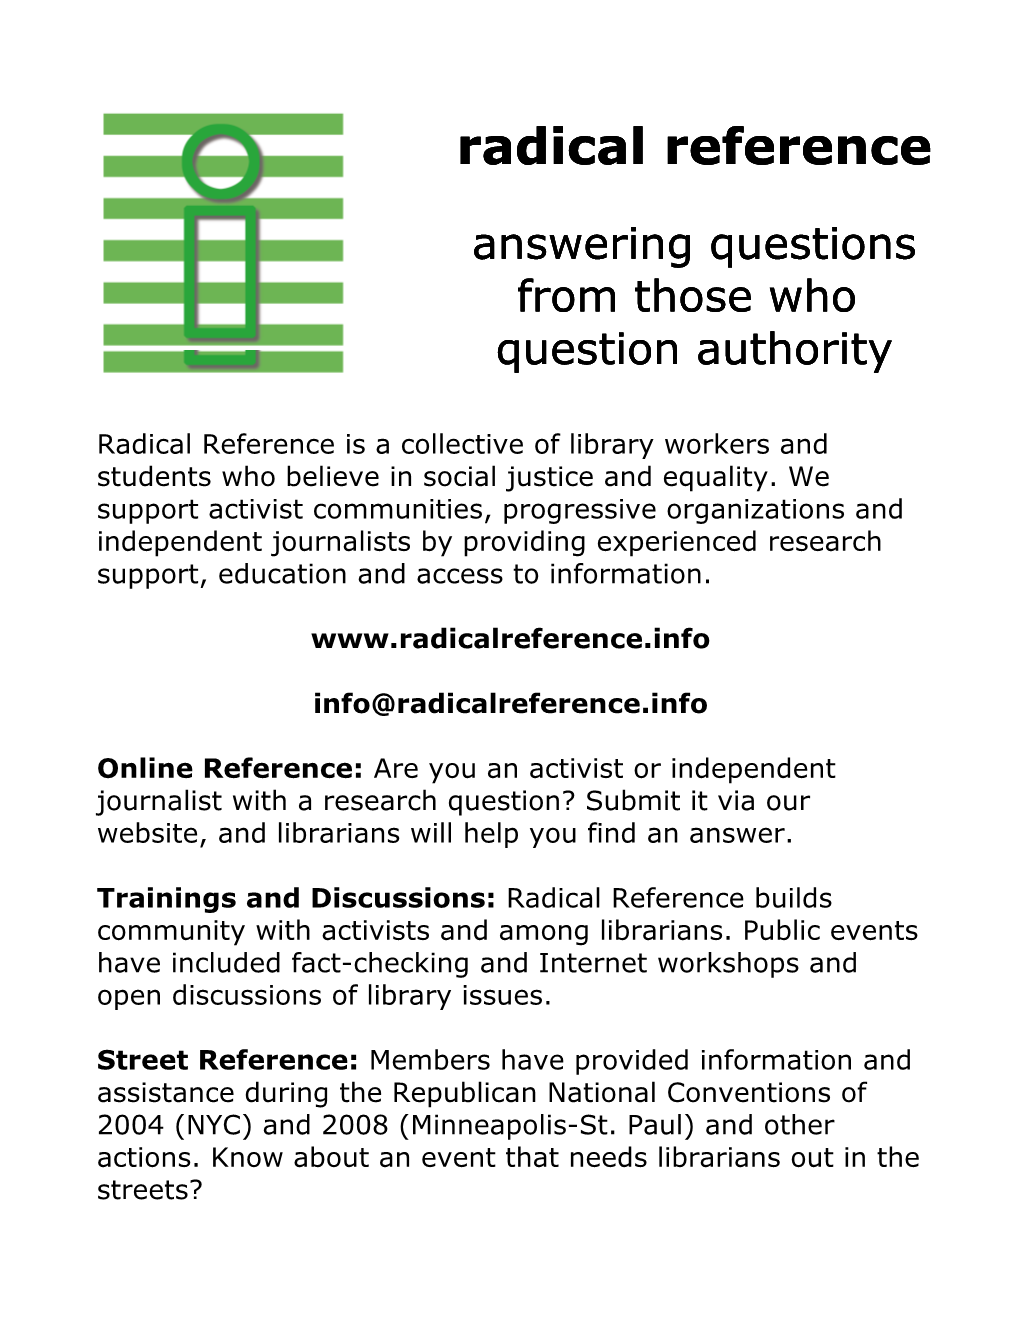 Radical Reference: Answering Questions from Those Who Question Authority